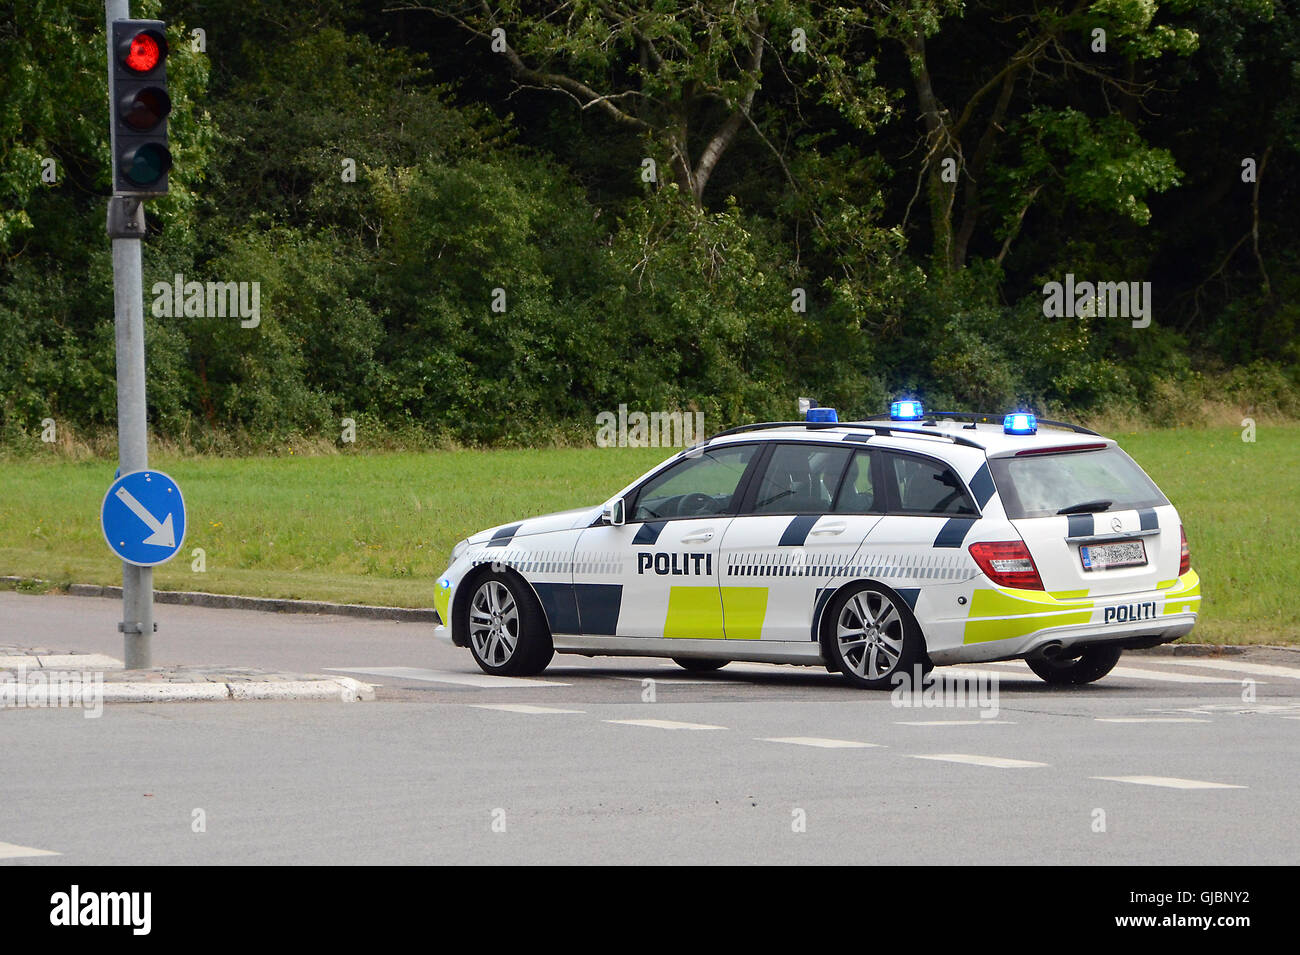 Danish Police car with blue light takes sharp corner at red light. Pic labeled dig. altered, only because license plate blurred Stock Photo